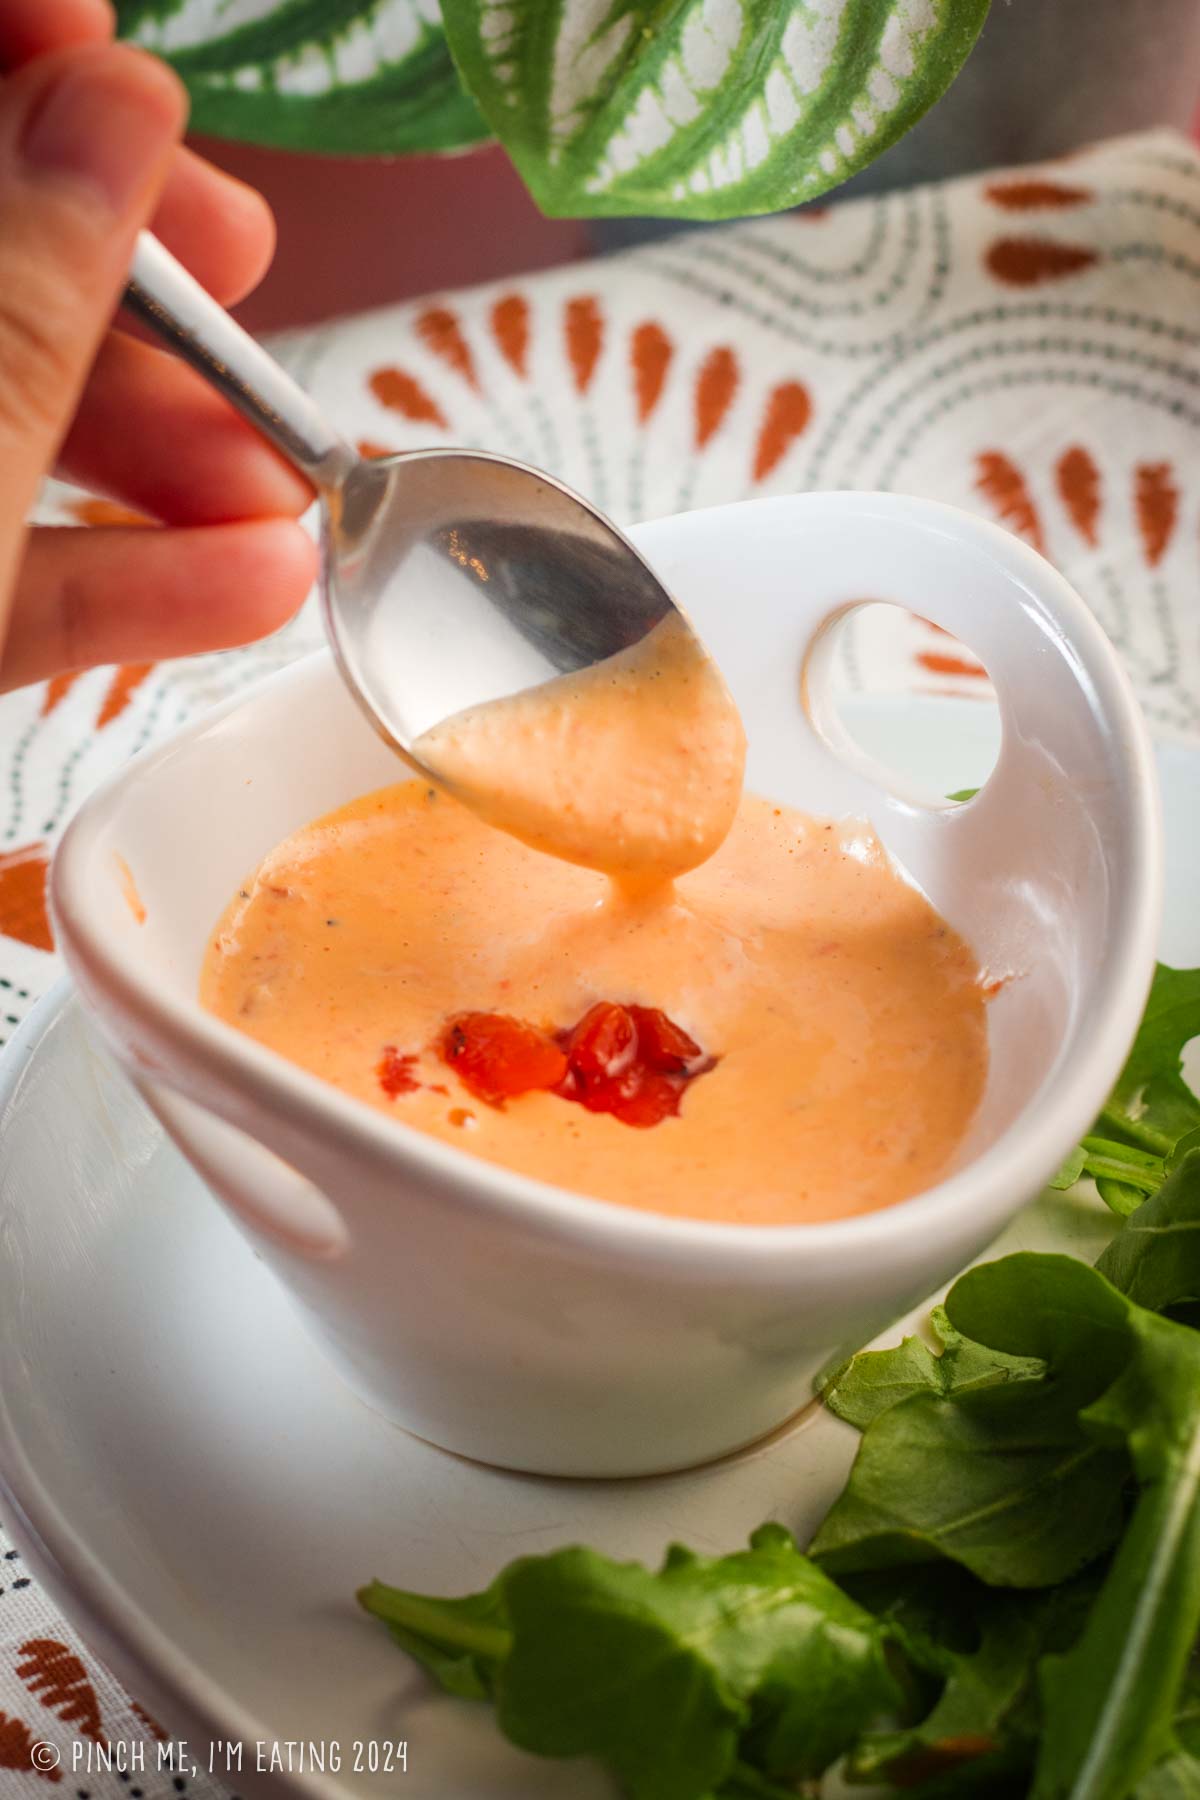 A spoon demonstrating the thick creamy consistency of roasted red bell pepper garlic aioli in a white bowl.